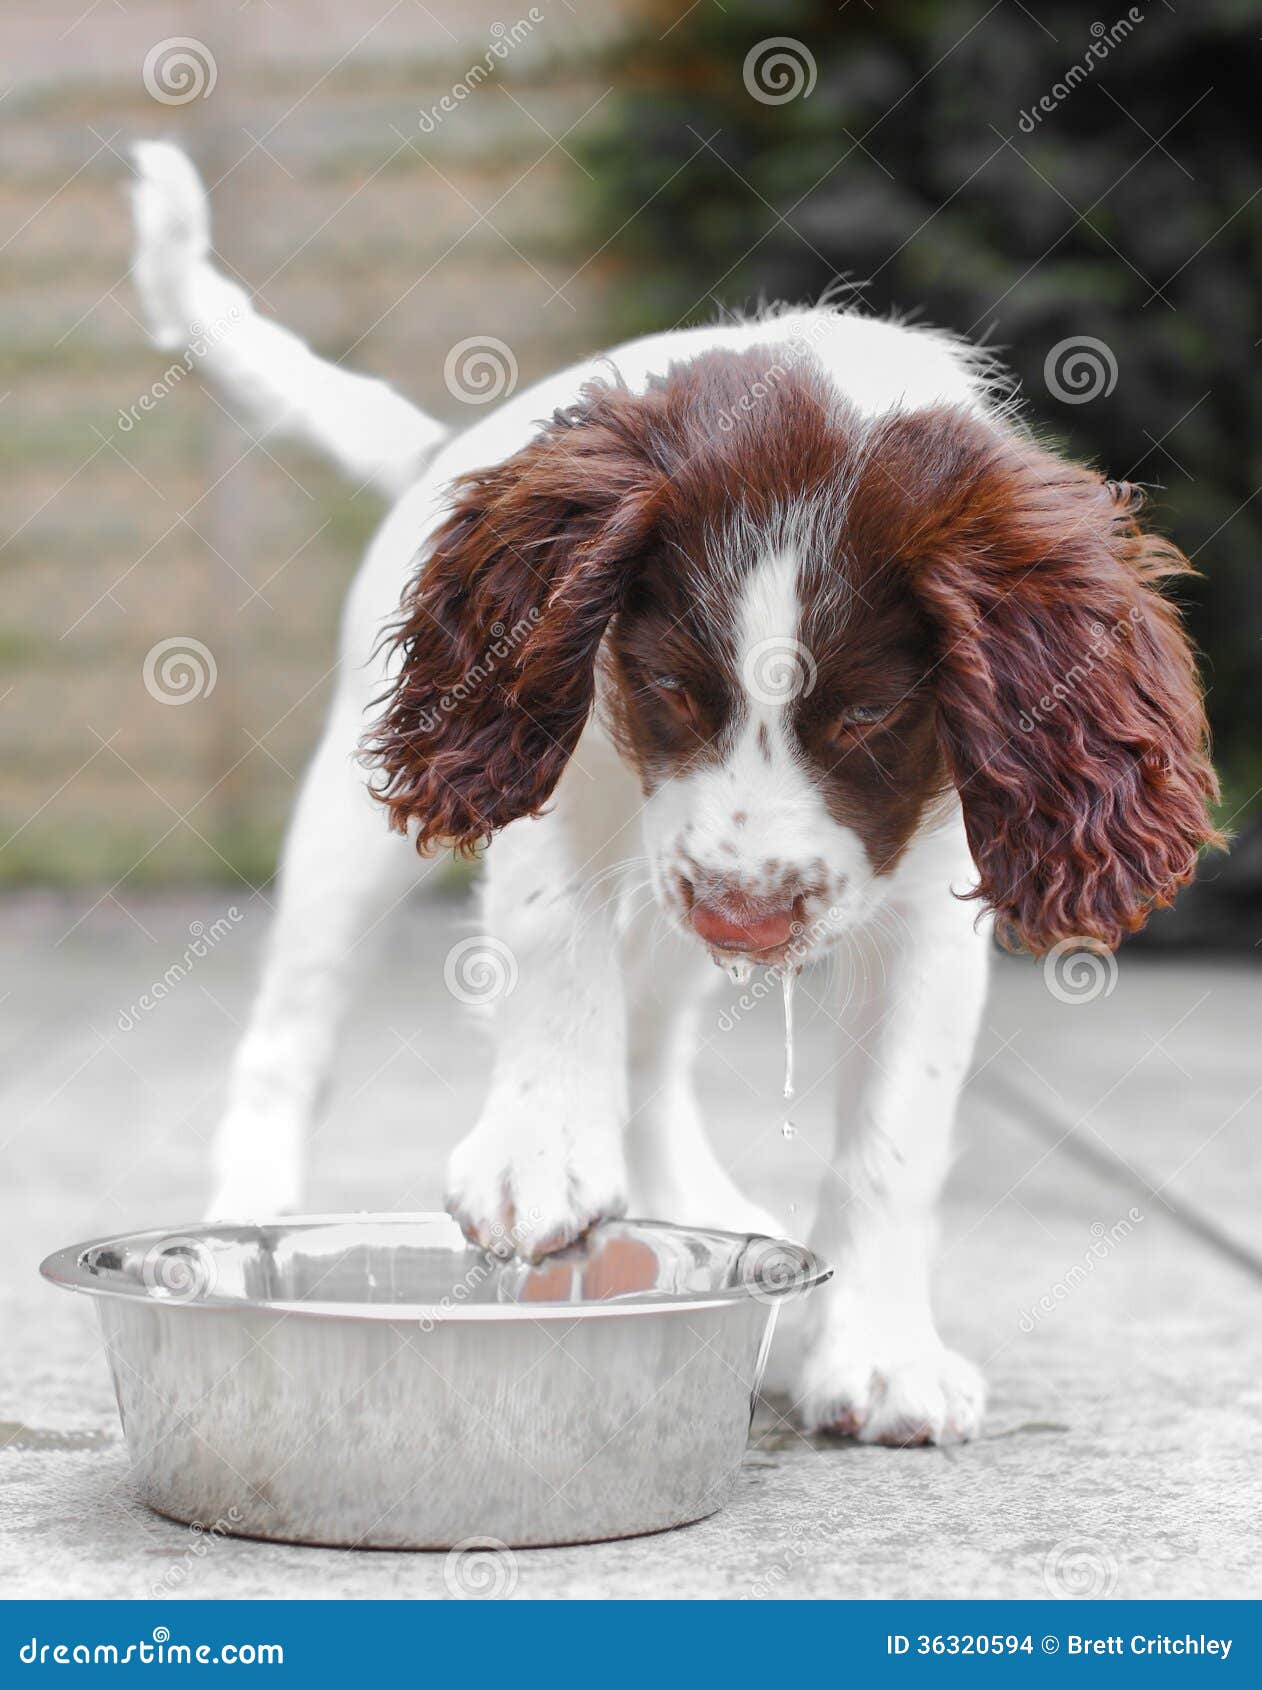 Puppy Dog Drinking Water Stock Photo Image Of Drinking 36320594